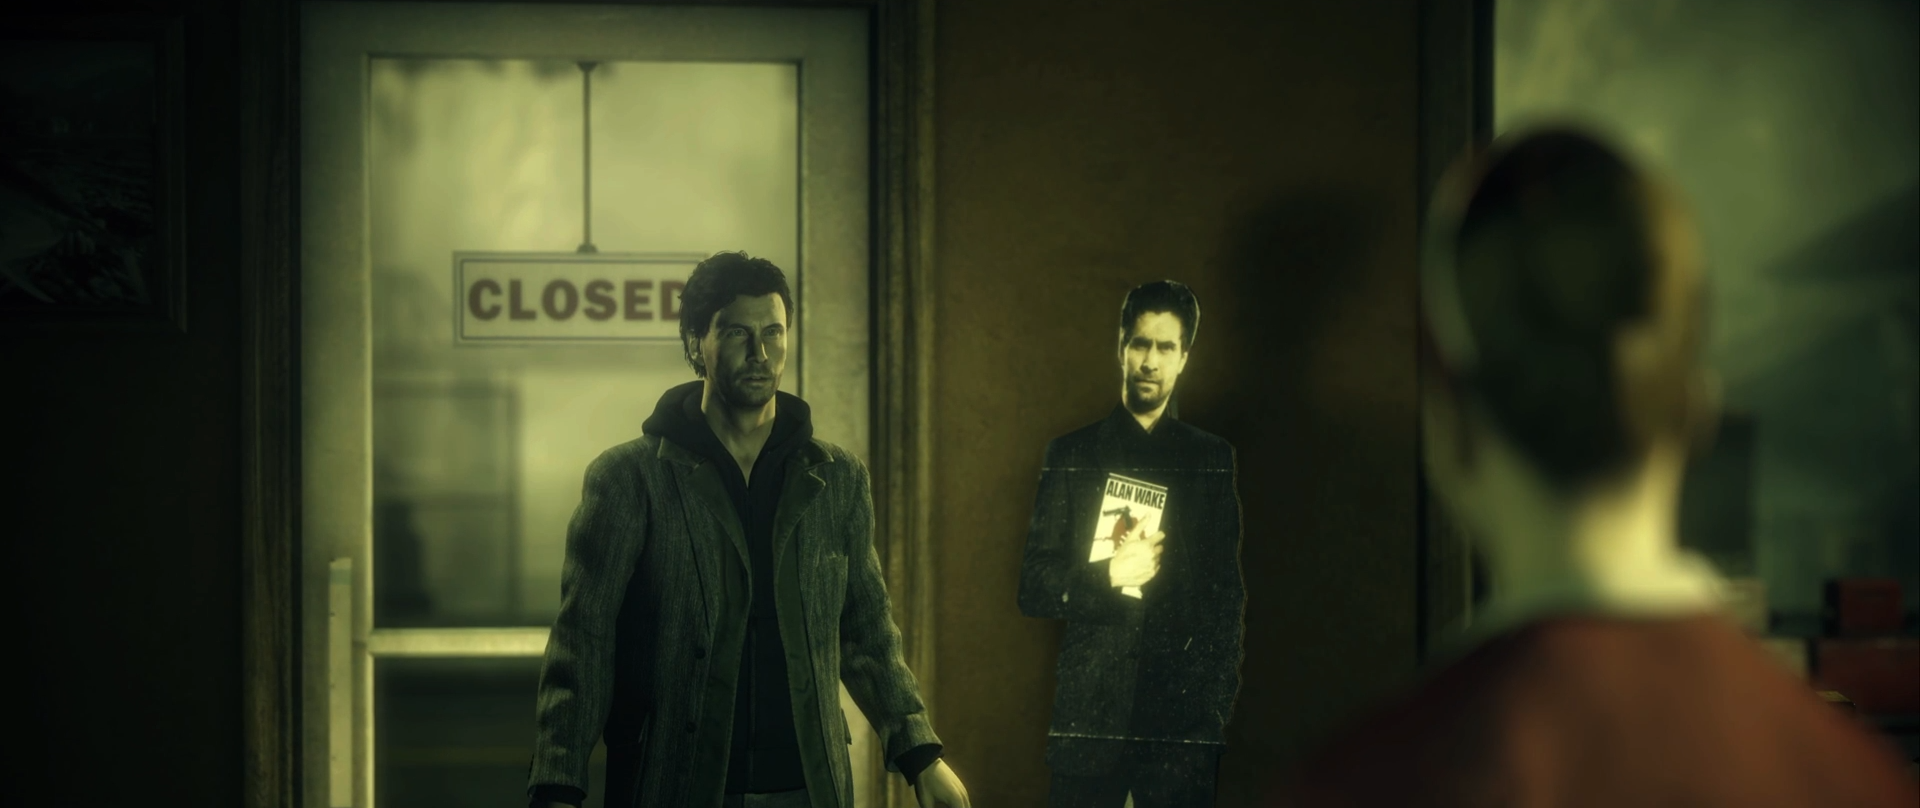 Alan Wake Remastered struggles to justify its own existence